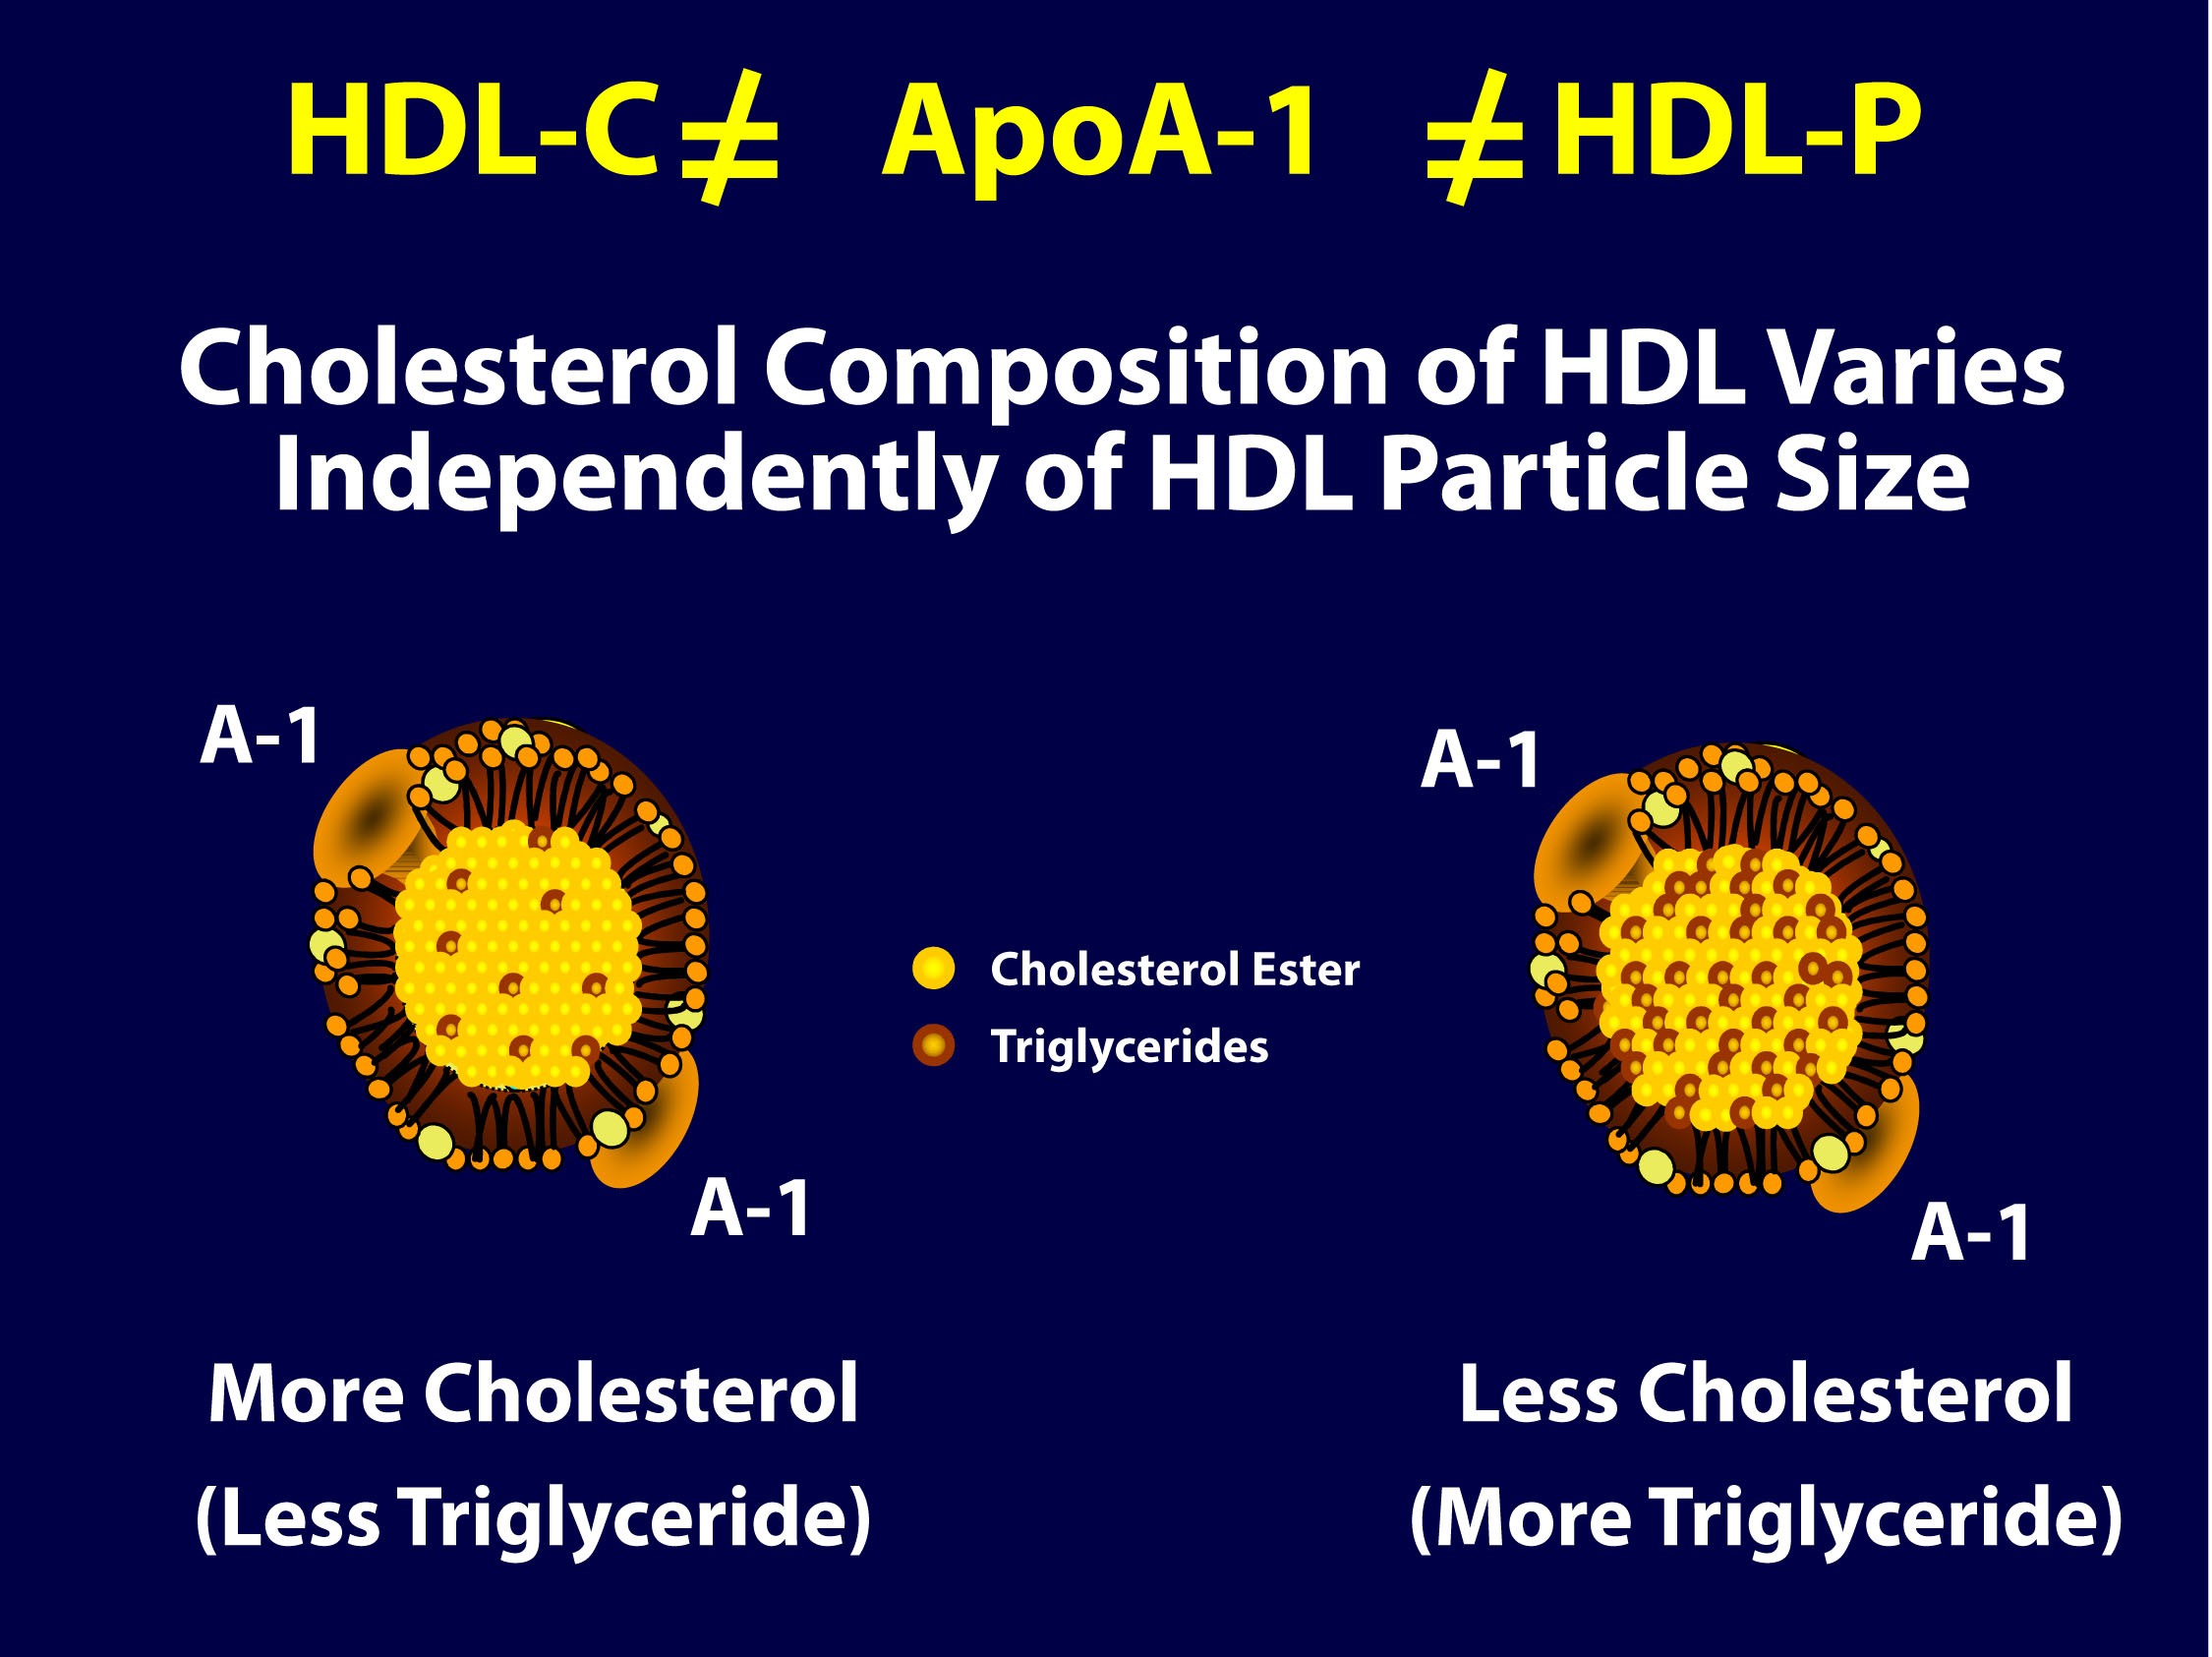 HDL-C not HDL-P